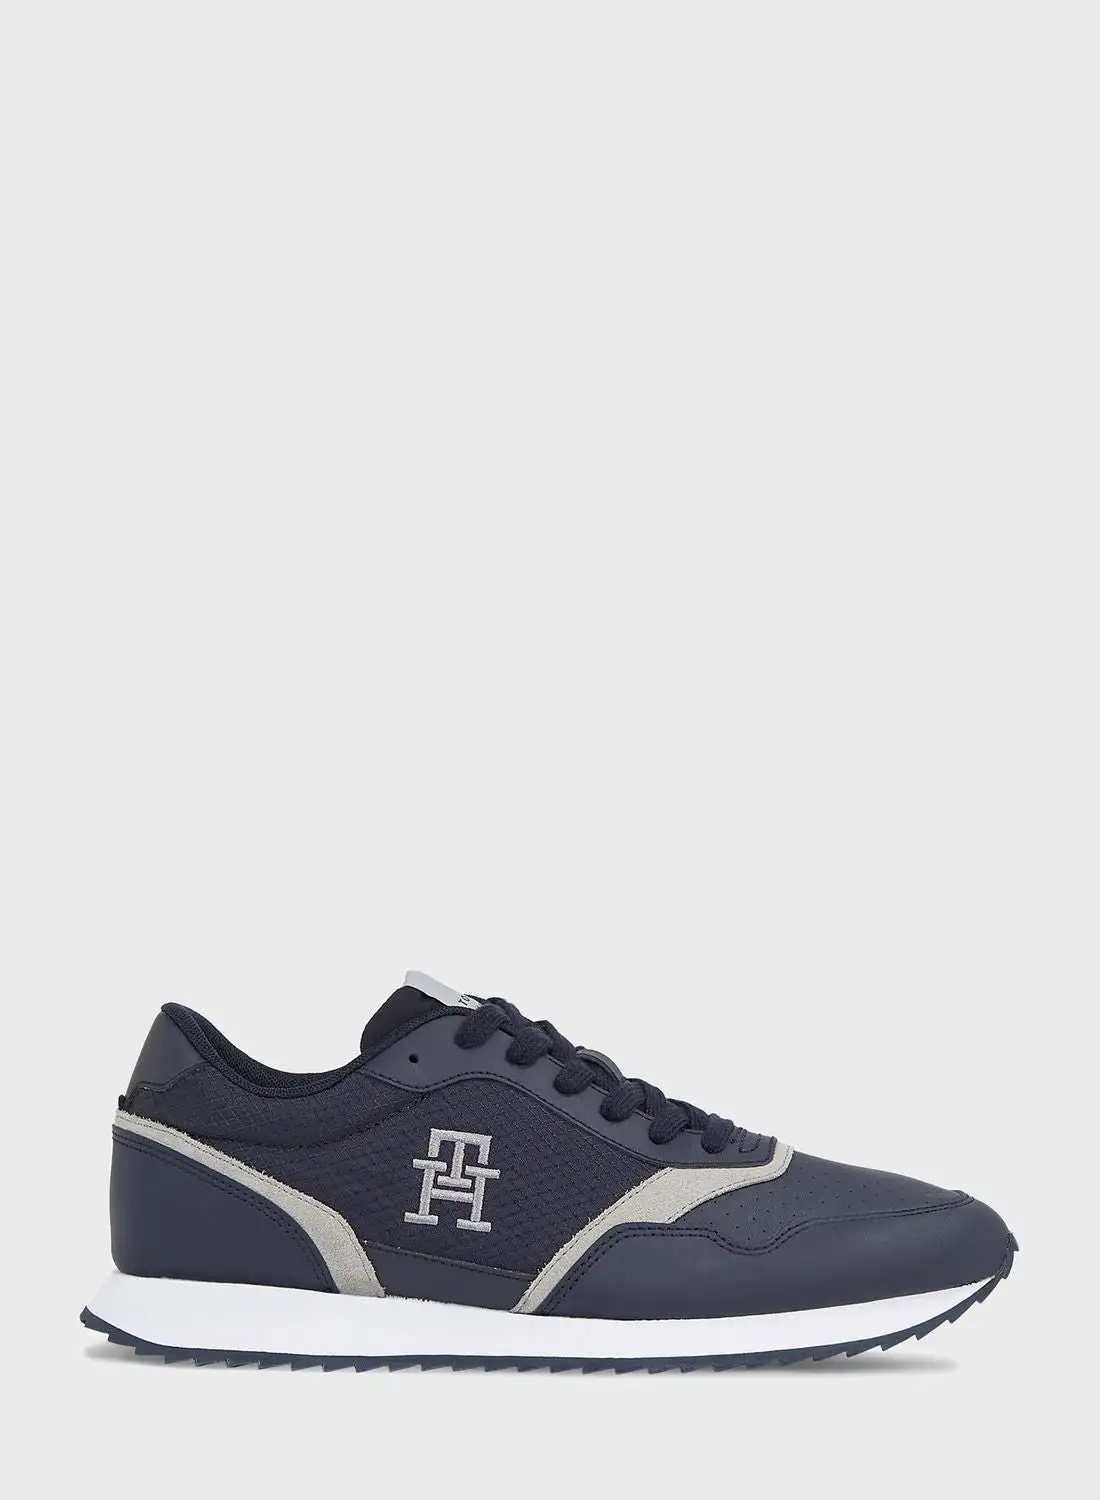 TOMMY HILFIGER Casual Low Top Sneakers